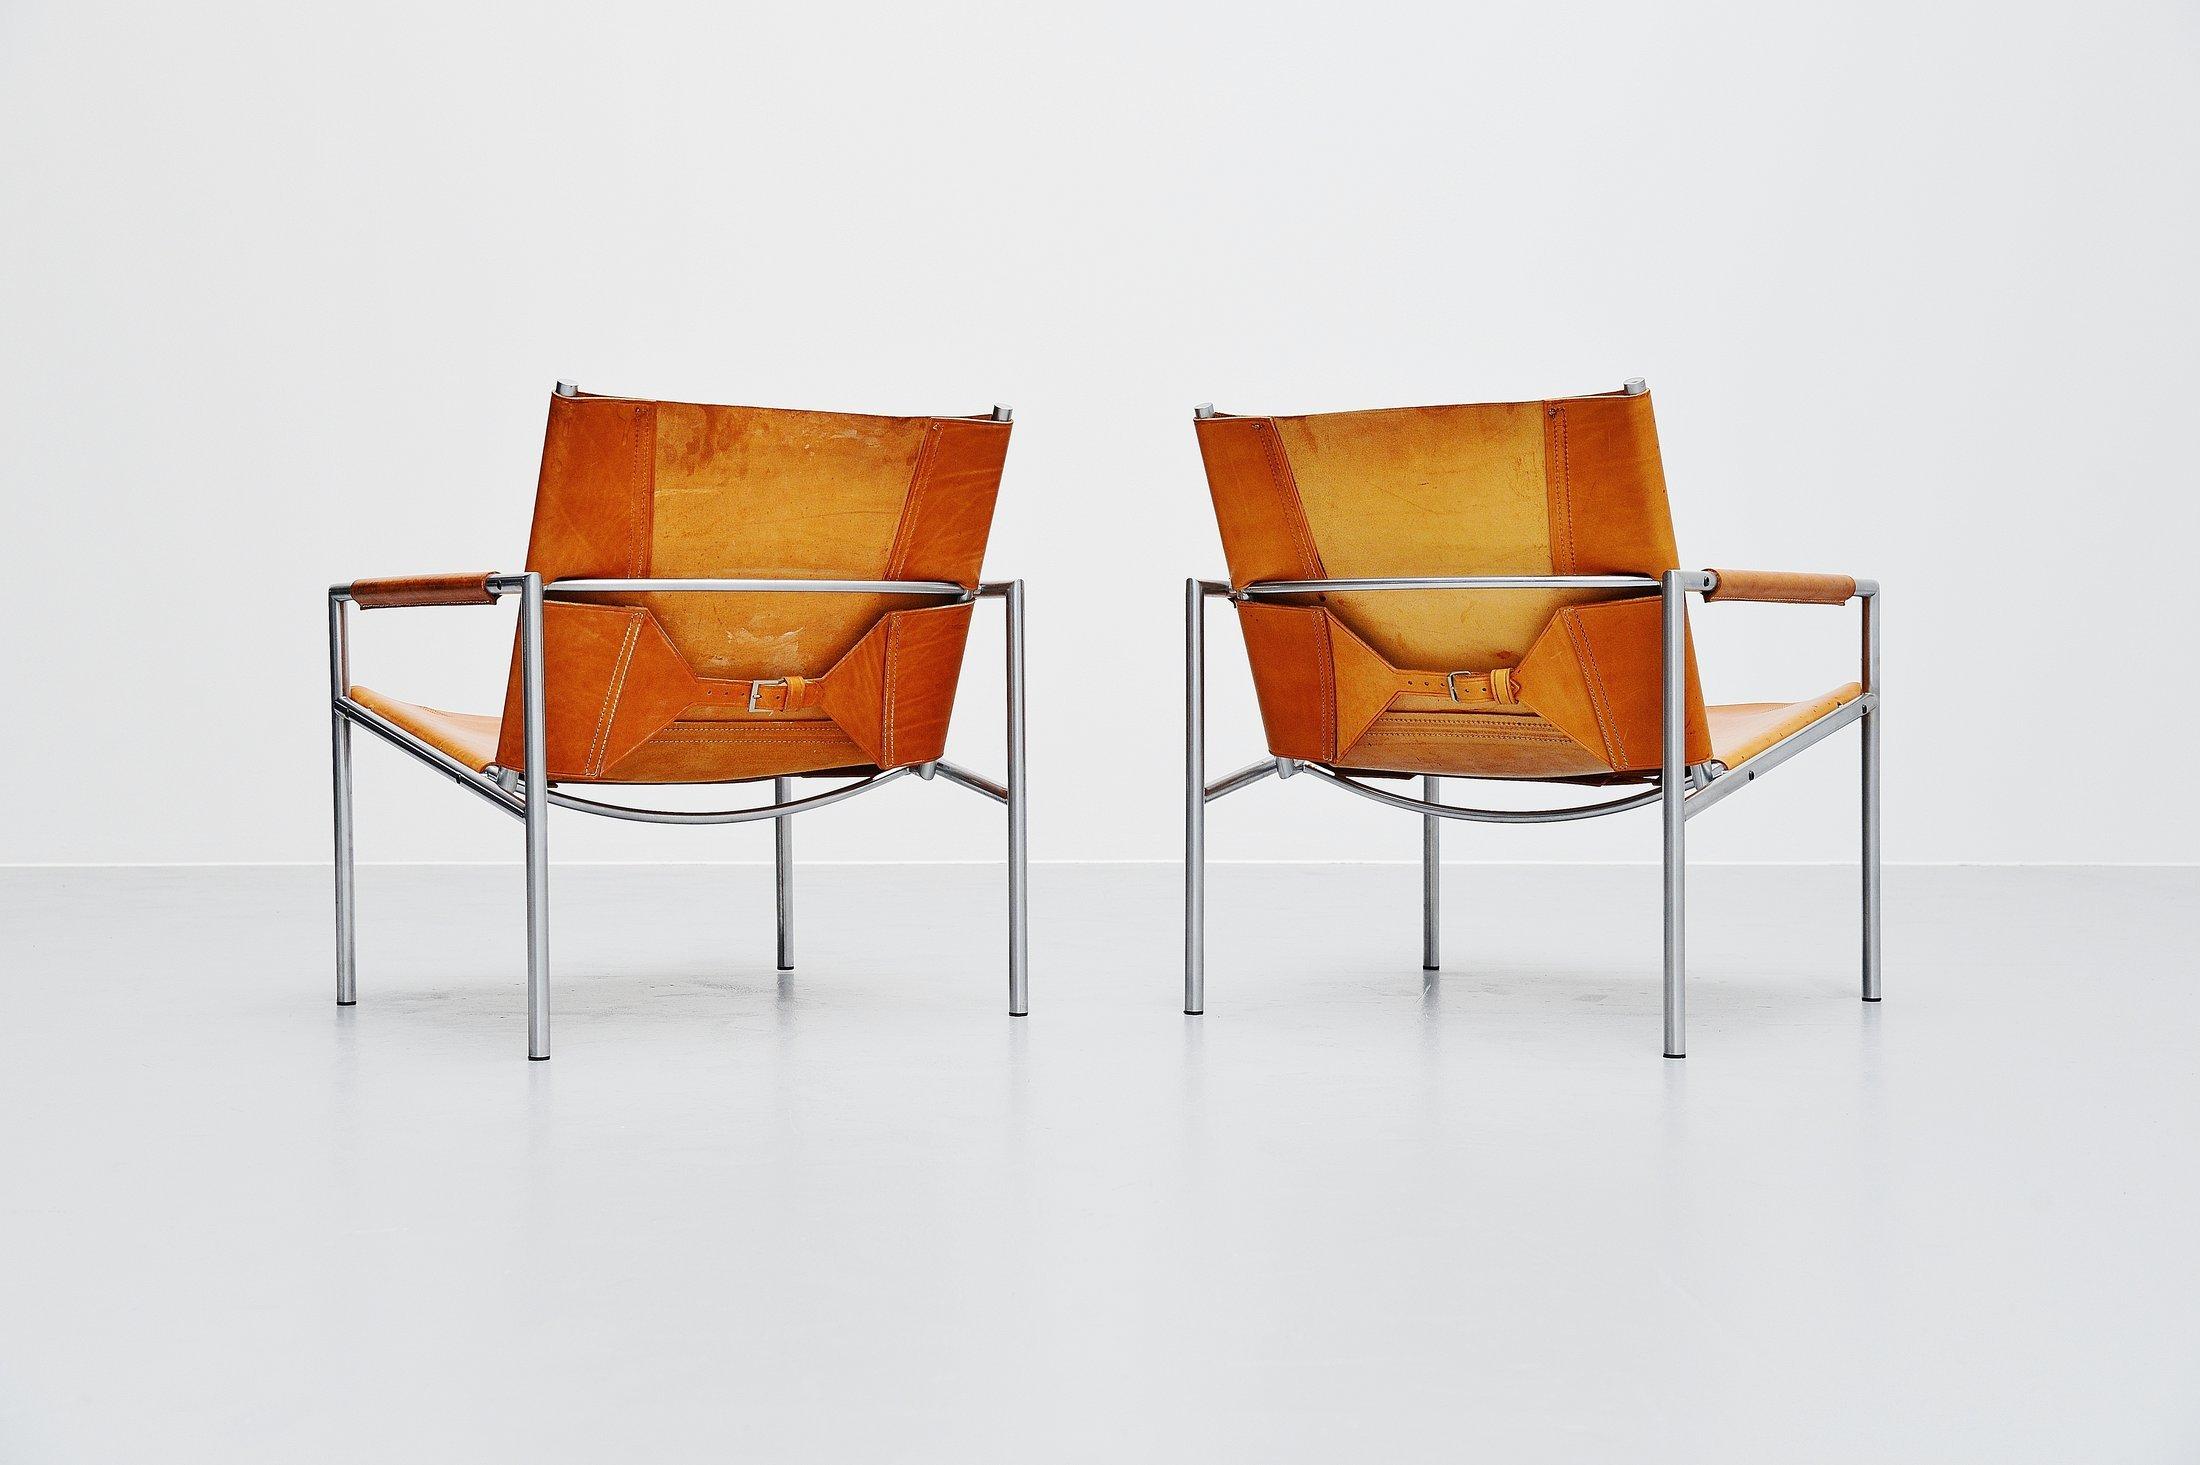 Fantastic patinated pair of lounge chairs model SZ01 designed by Martin Visser for ‘t spectrum, Holland, 1965. These chairs have a brushed steel tubular frame and very thick natural saddle leather seats and arm rests finishing. The natural leather